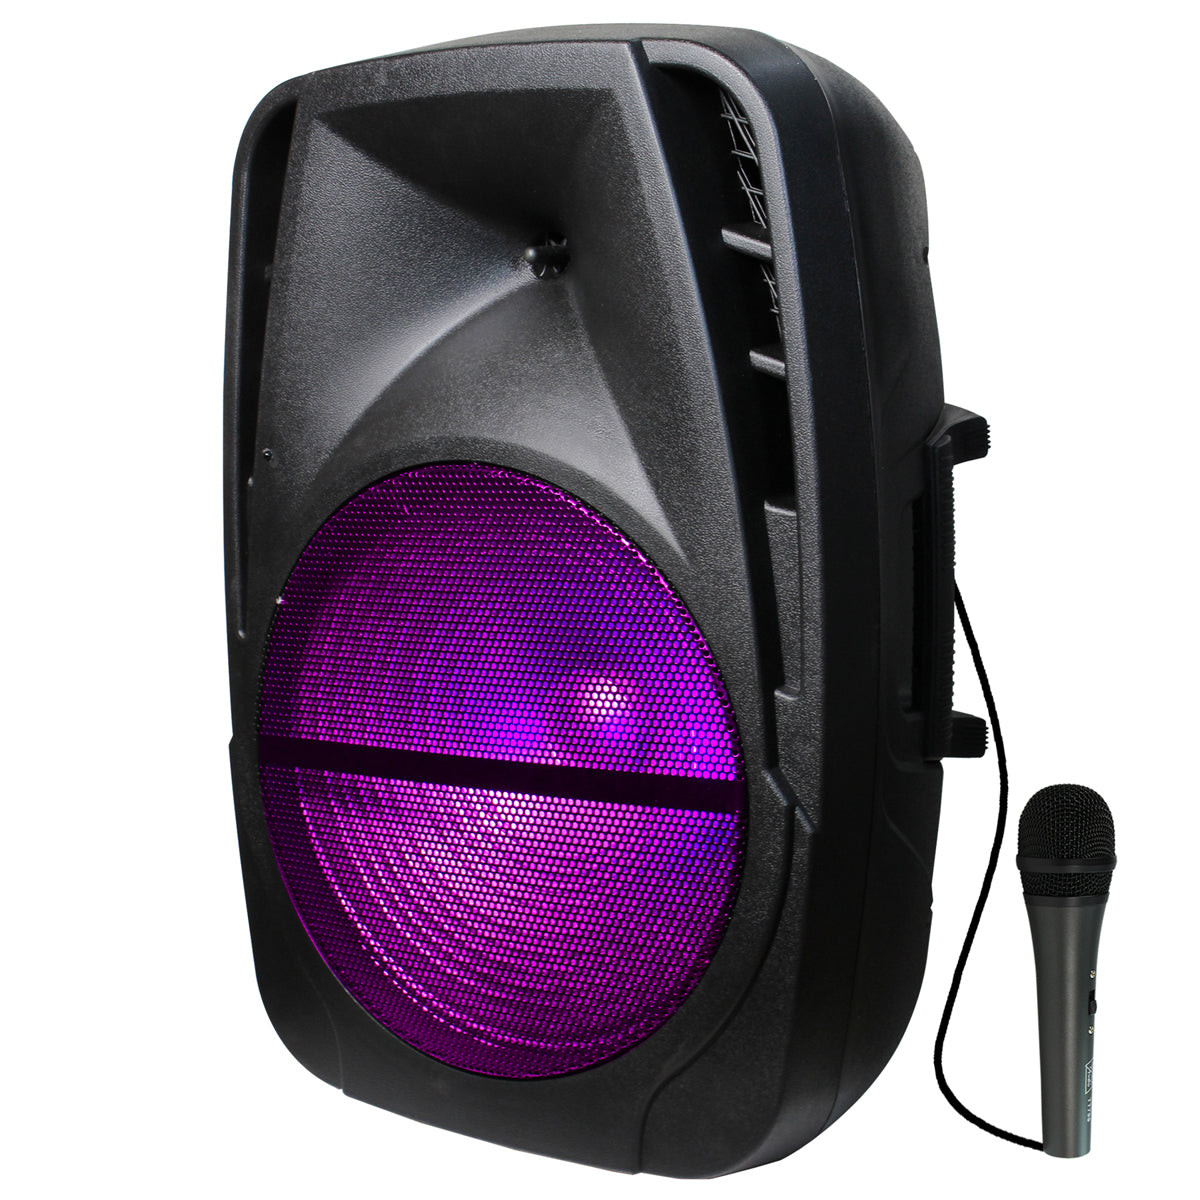 Fully Amplified Portable 2200 Watts Peak Power 15” Speaker WITH LED LIGHT MICROPHONE & STAND INCLUDED”